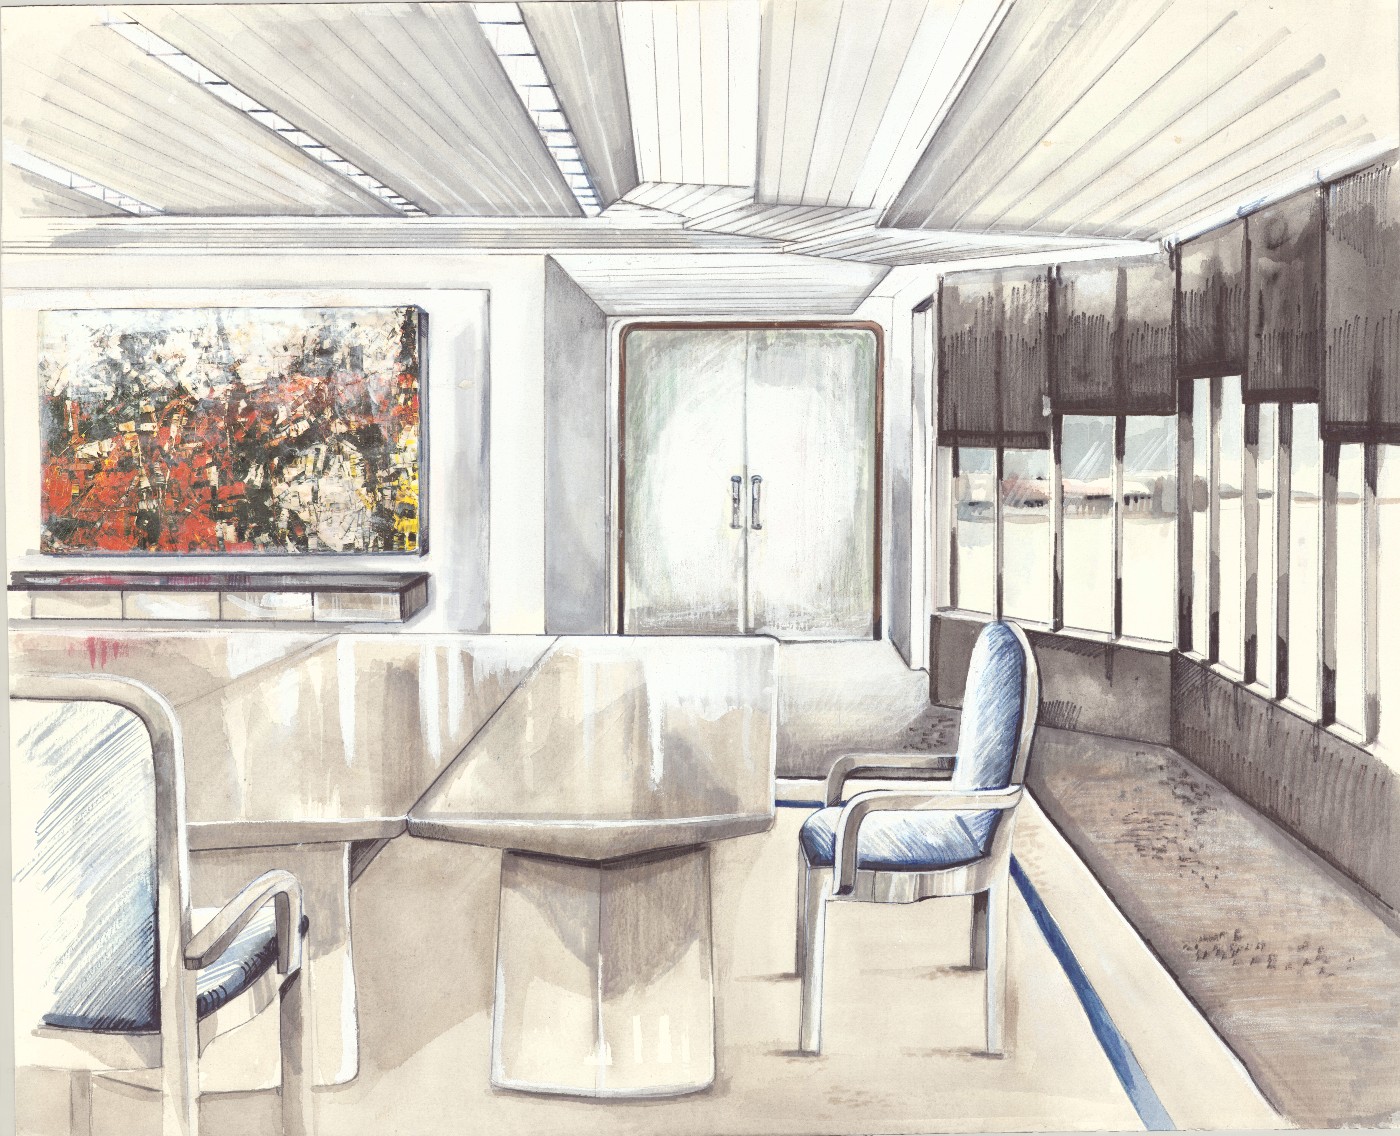 0Watercolour Representing the Proposed Interior Design for the Frontenac Dining Room, circa 1980